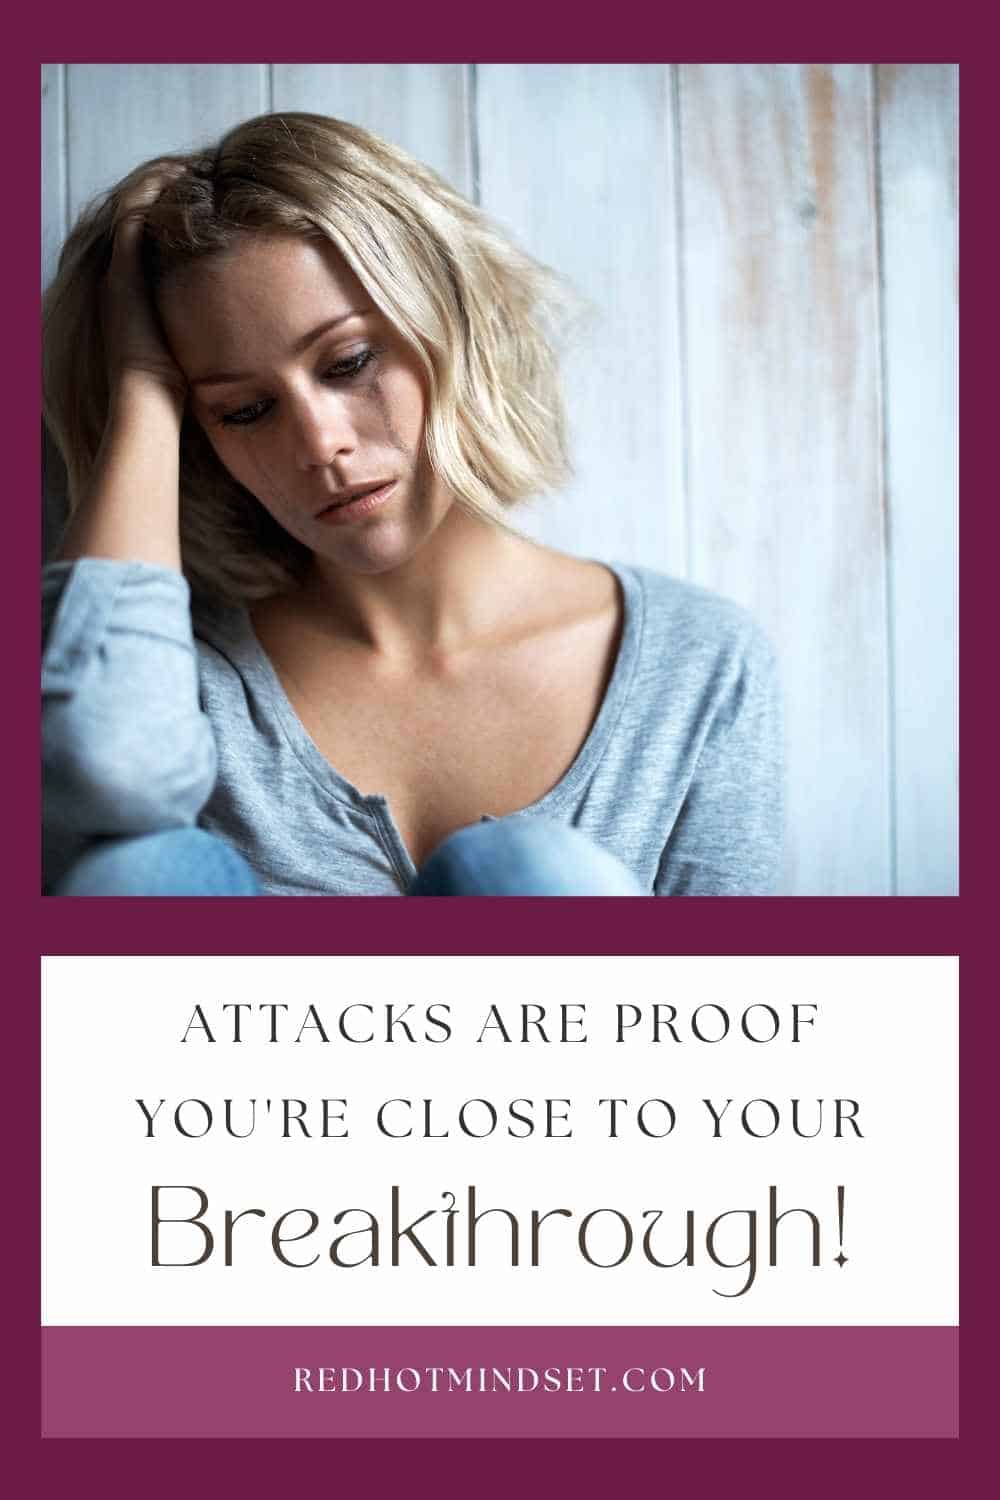 Ep 133 | Feel Like You’re Being Attacked? It’s Proof You’re Close to Your Breakthrough, Don’t Stop!